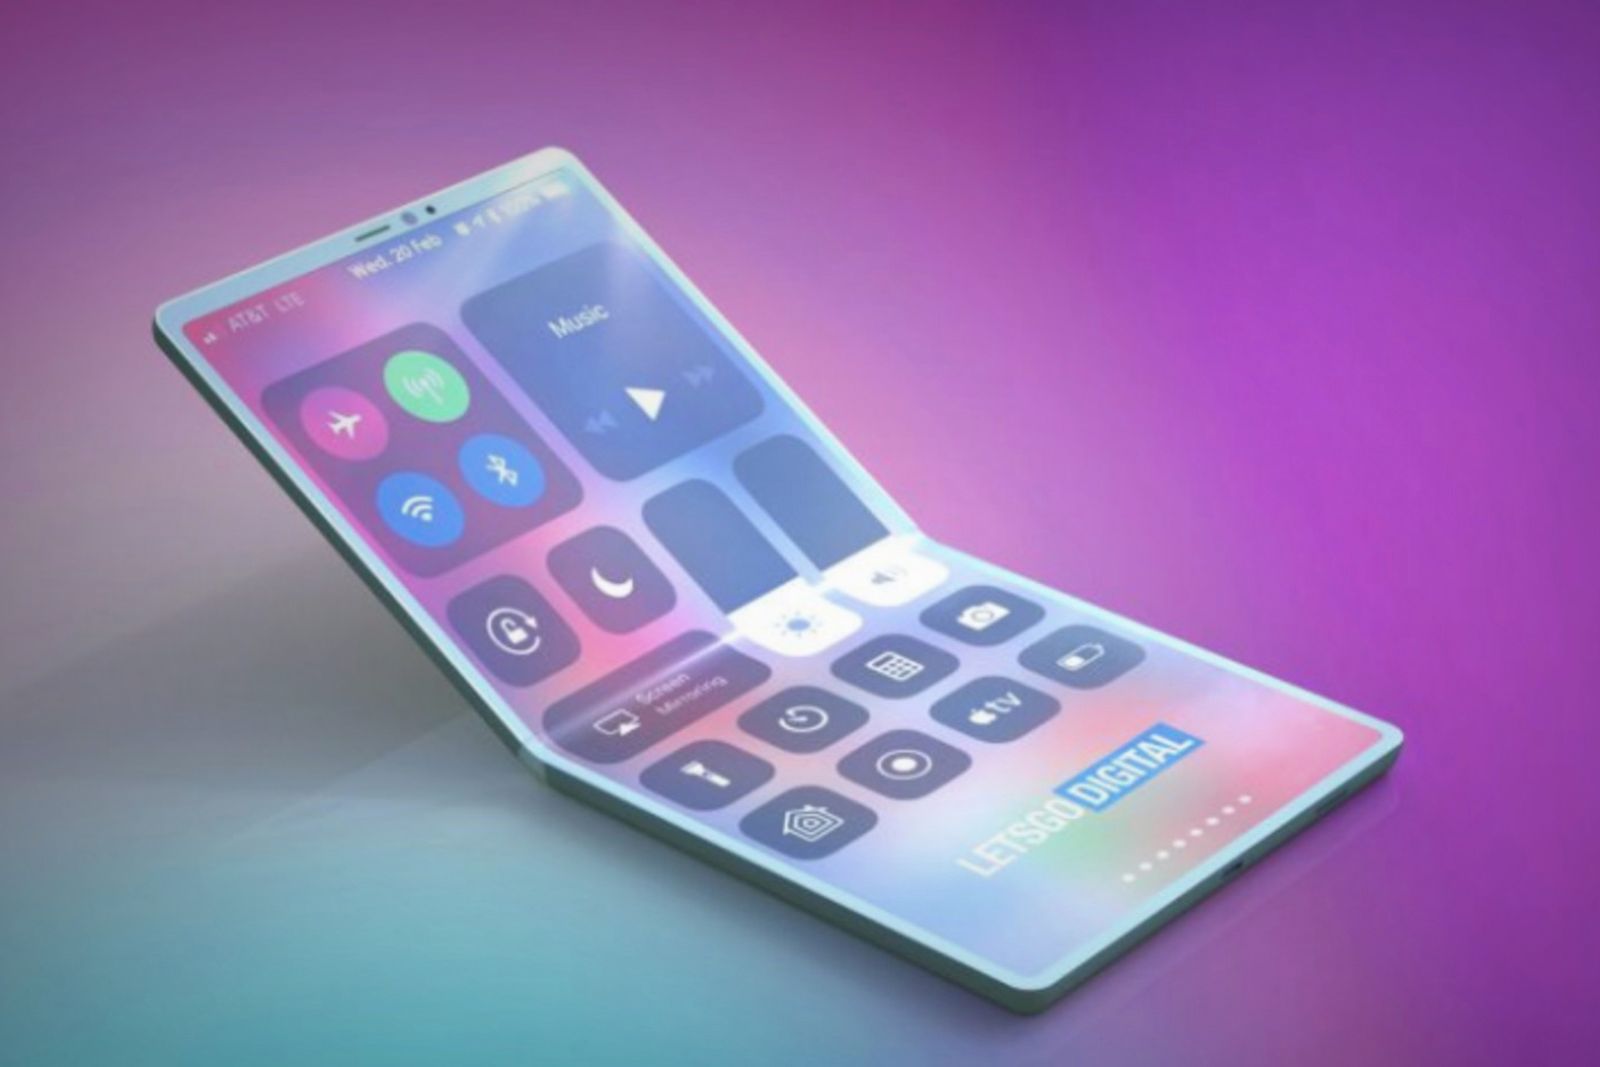 Concept showing a foldable iPhone